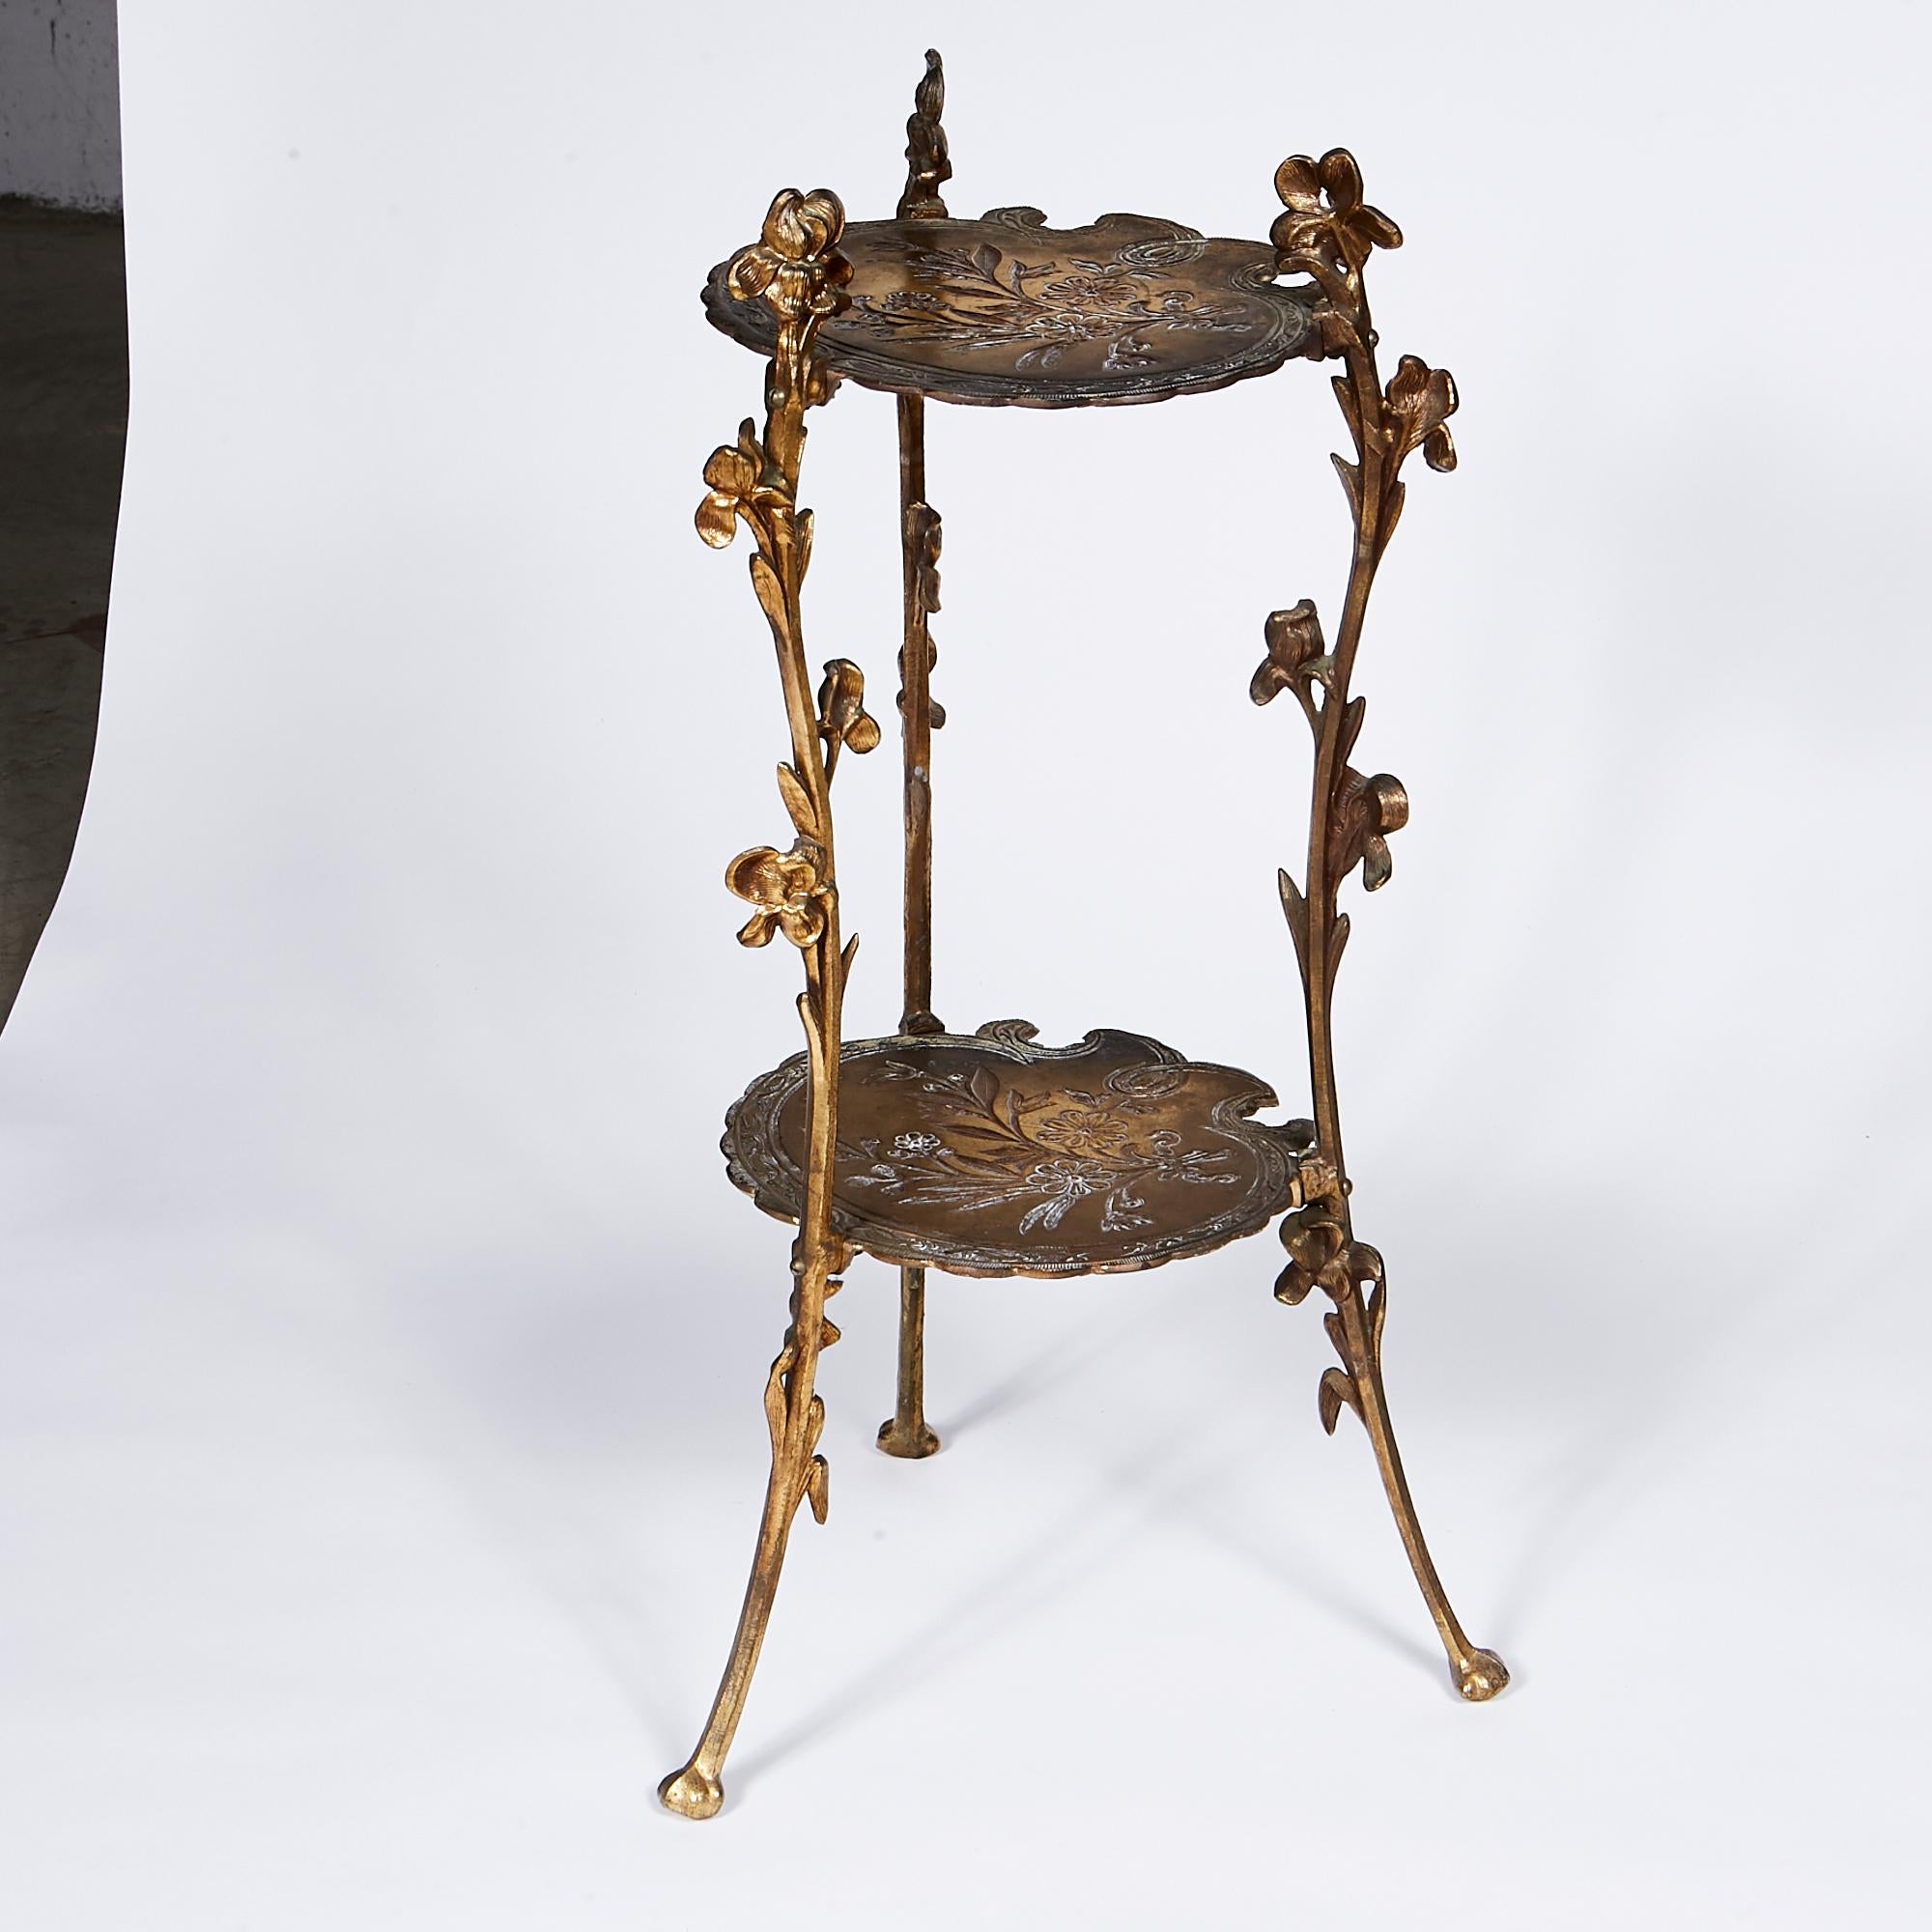 Vintage floral accented solid brass two-tier plant stand or side table. No marks. In very good used condition.